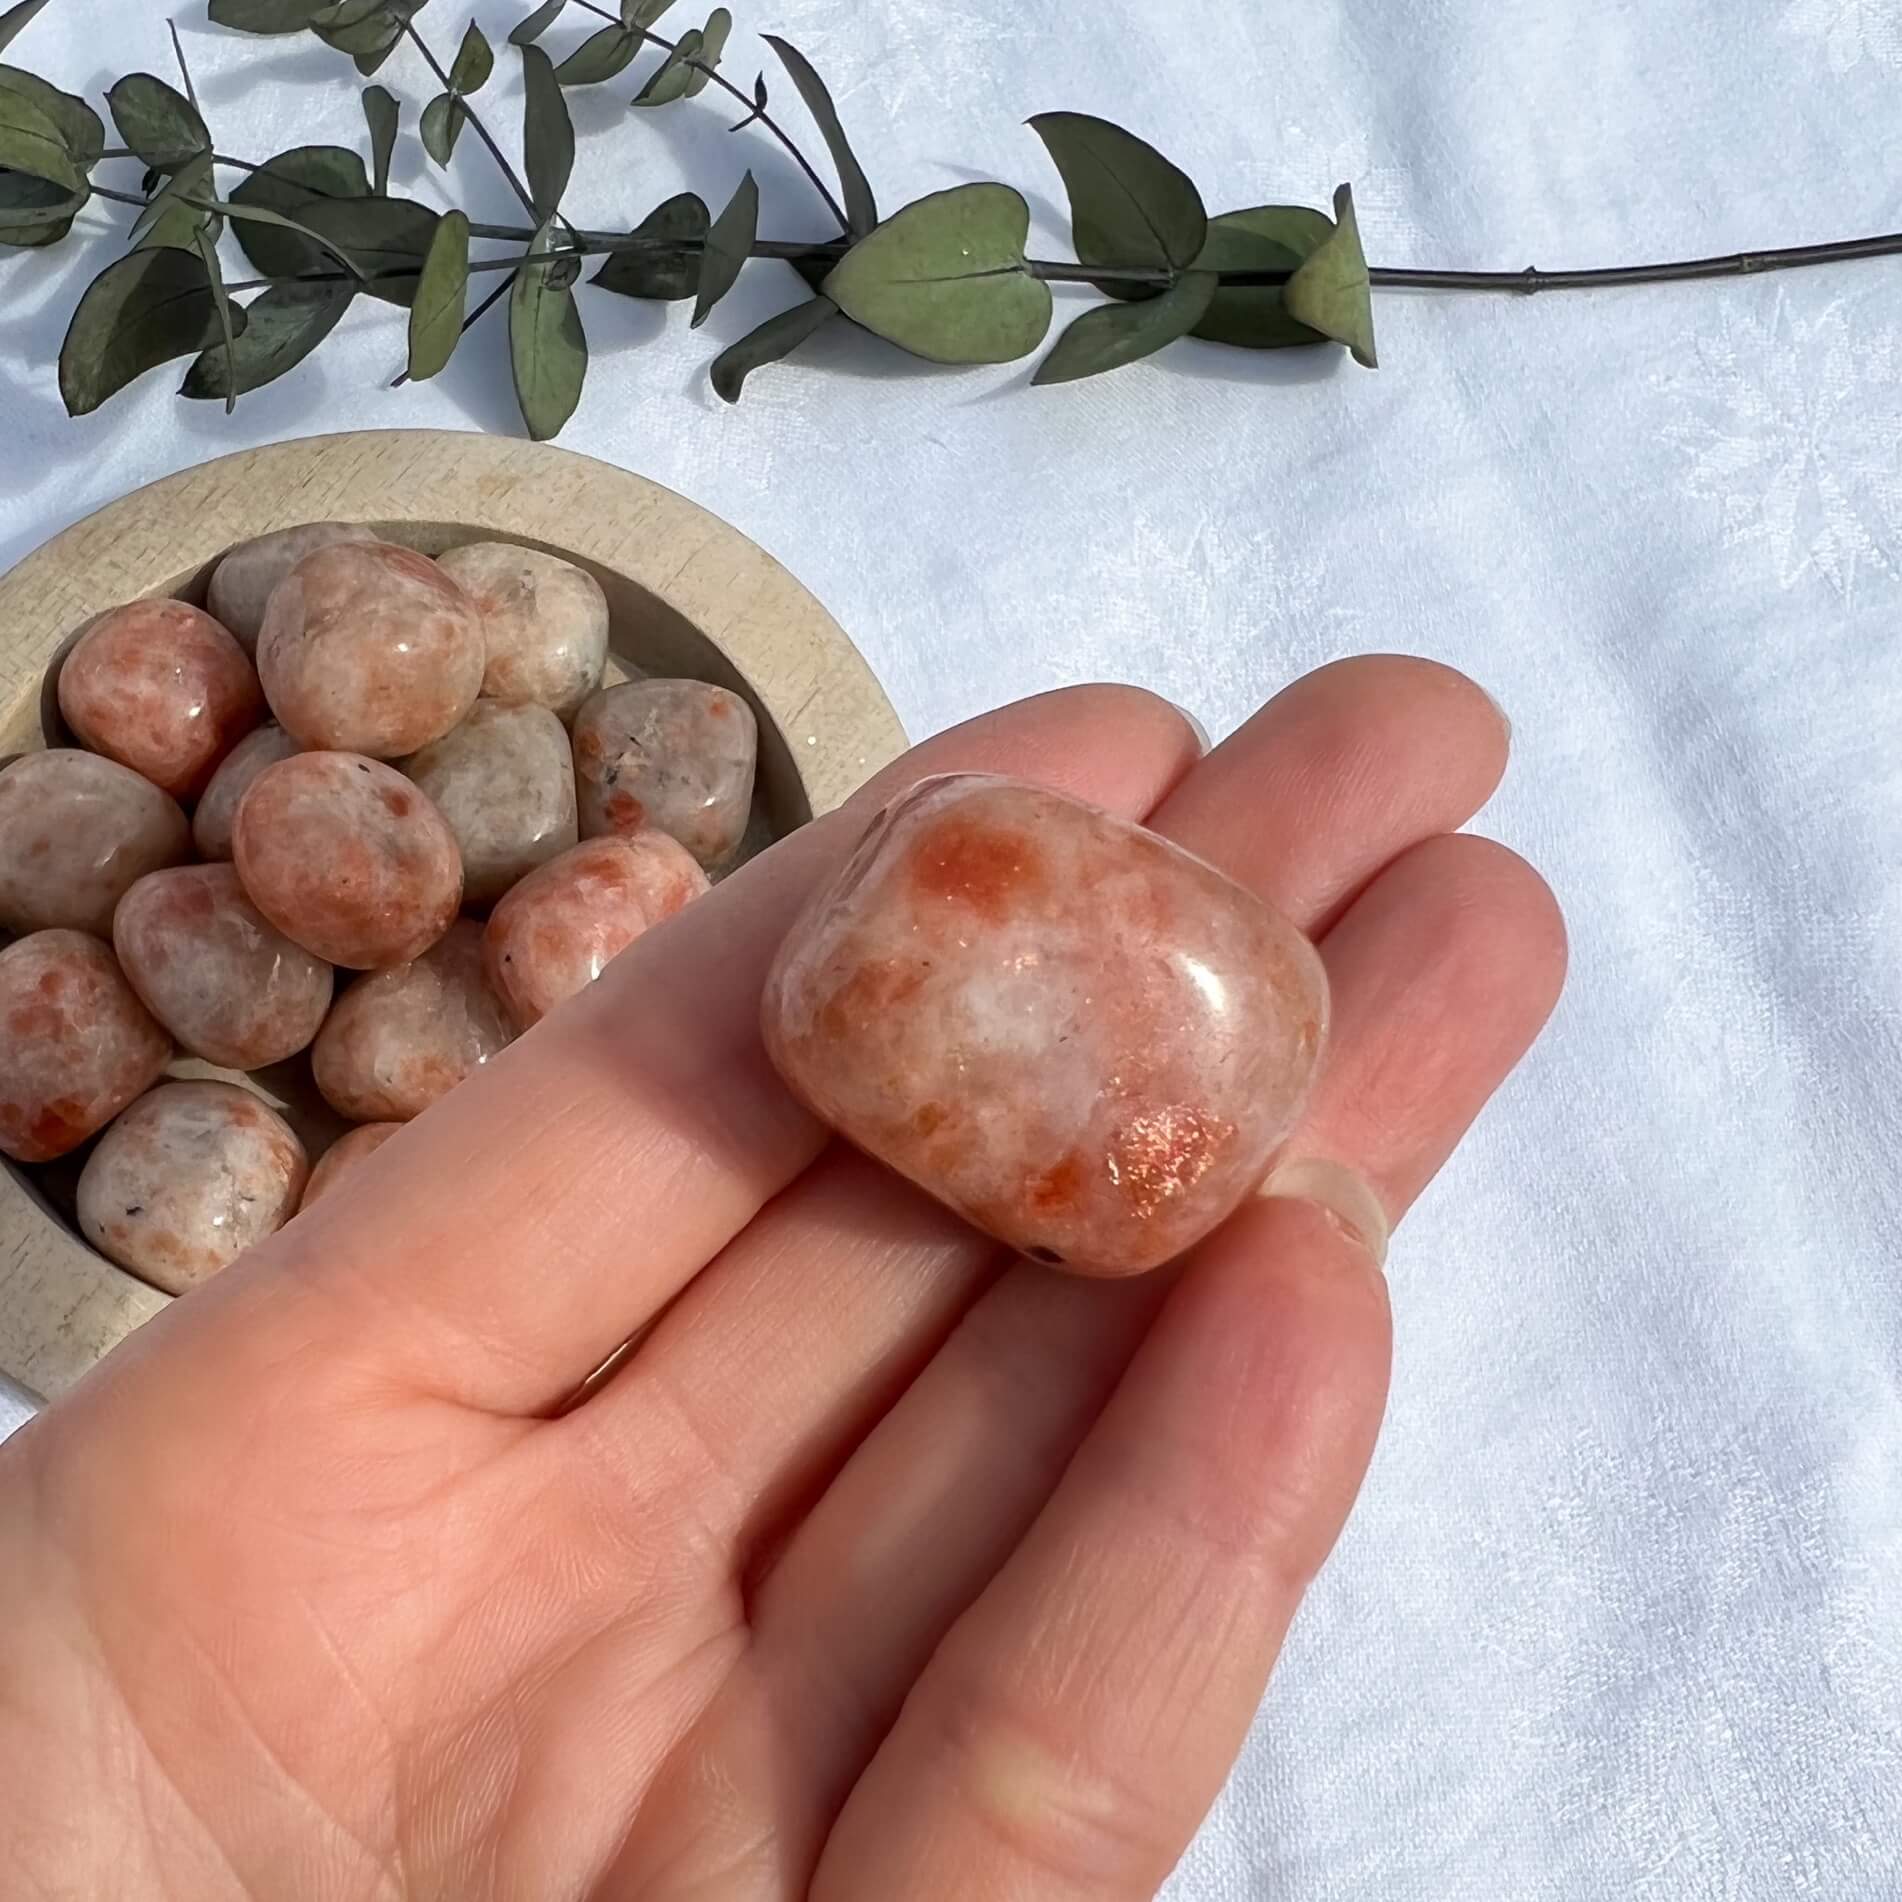 Bright orange sparkly sunstone crystal pebble held in an outstretched hand